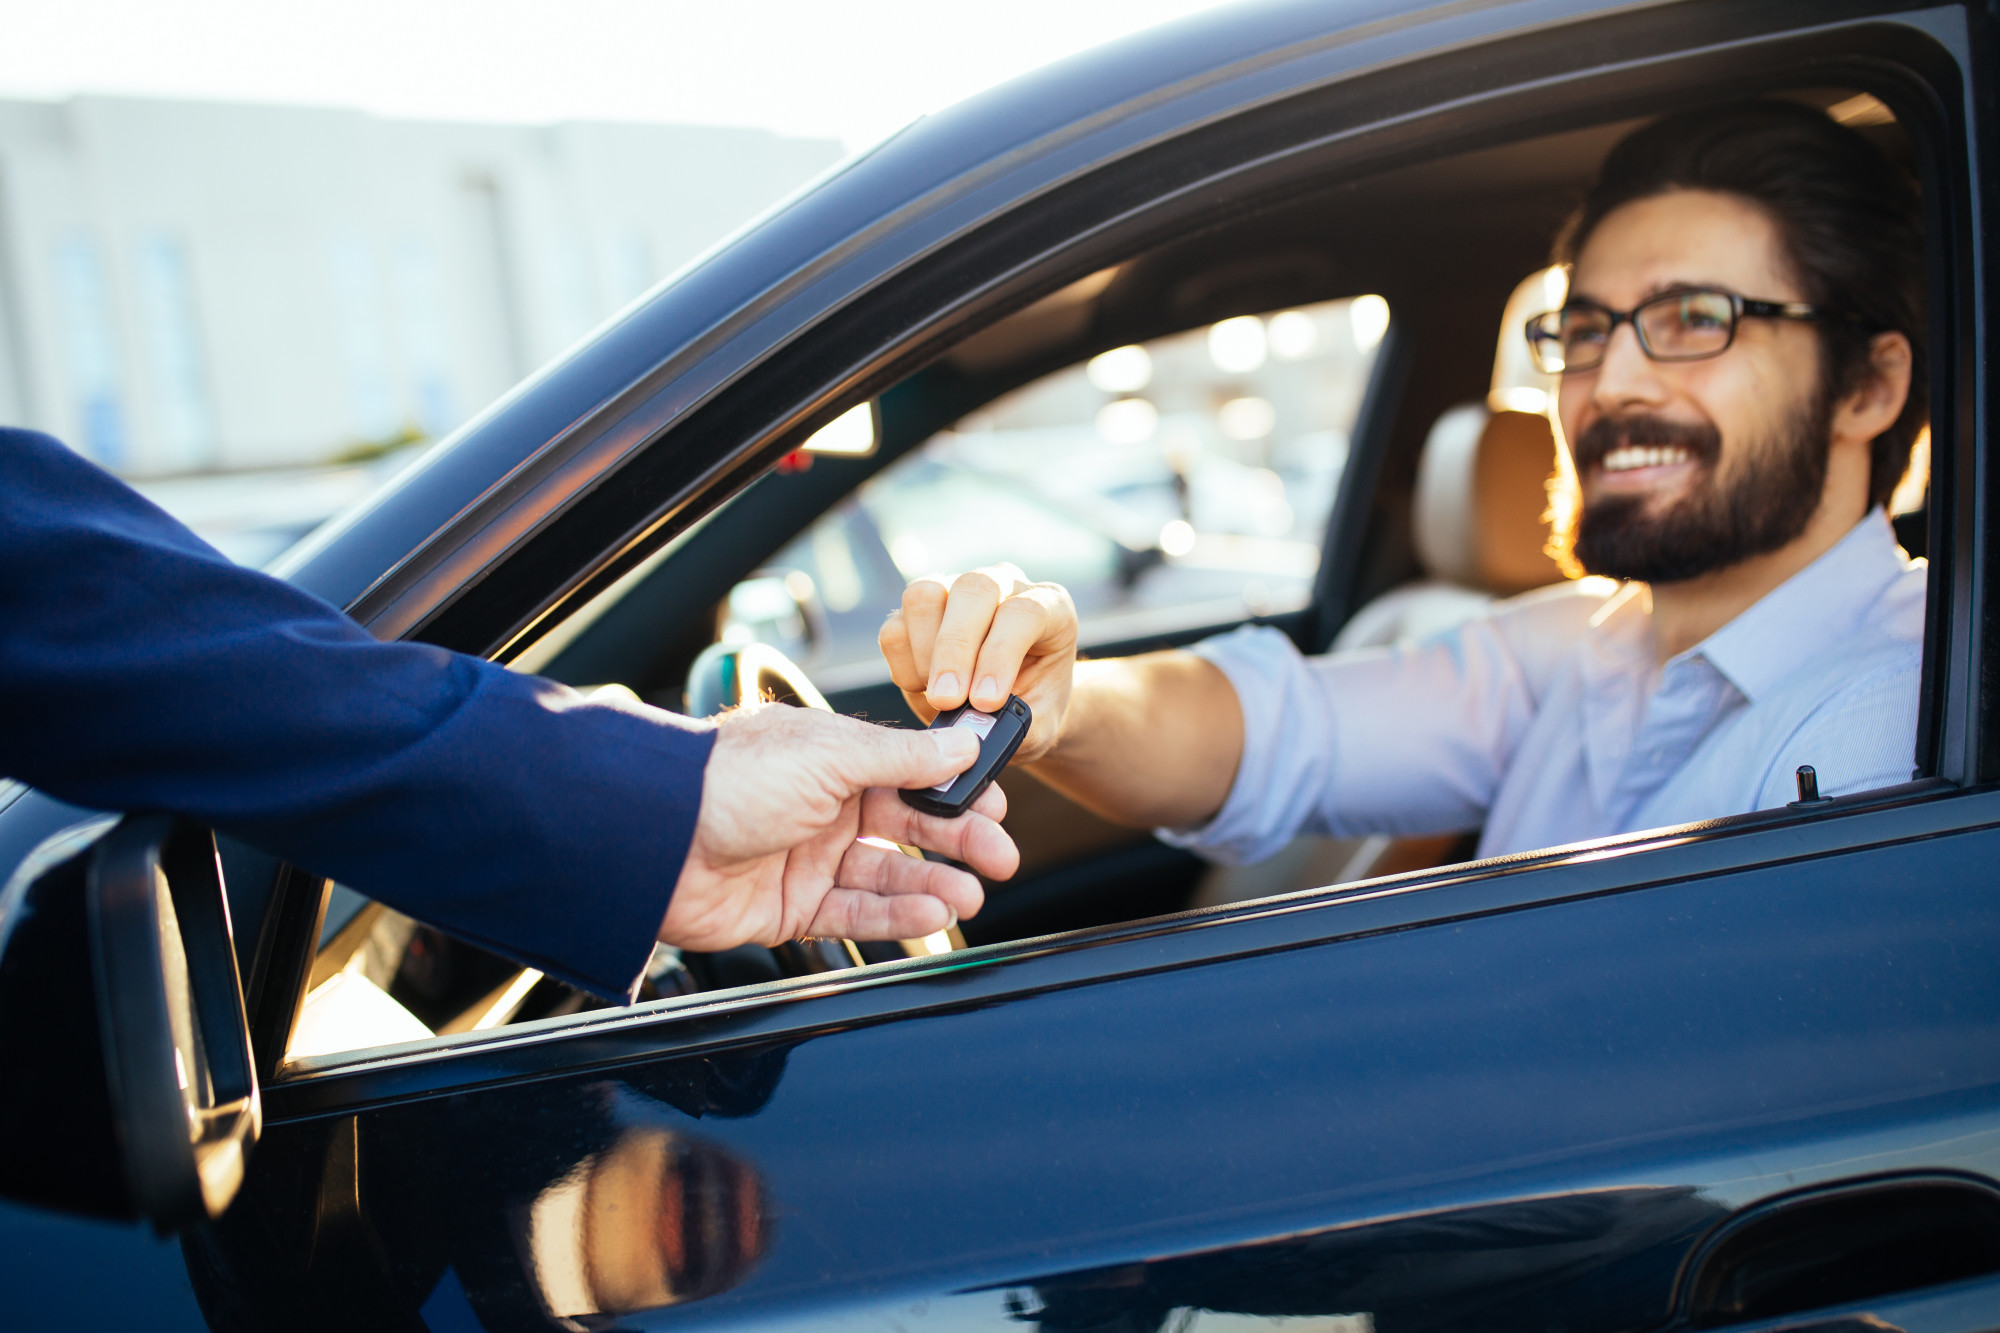 Handing the Key to the Person Who Purchase a Car